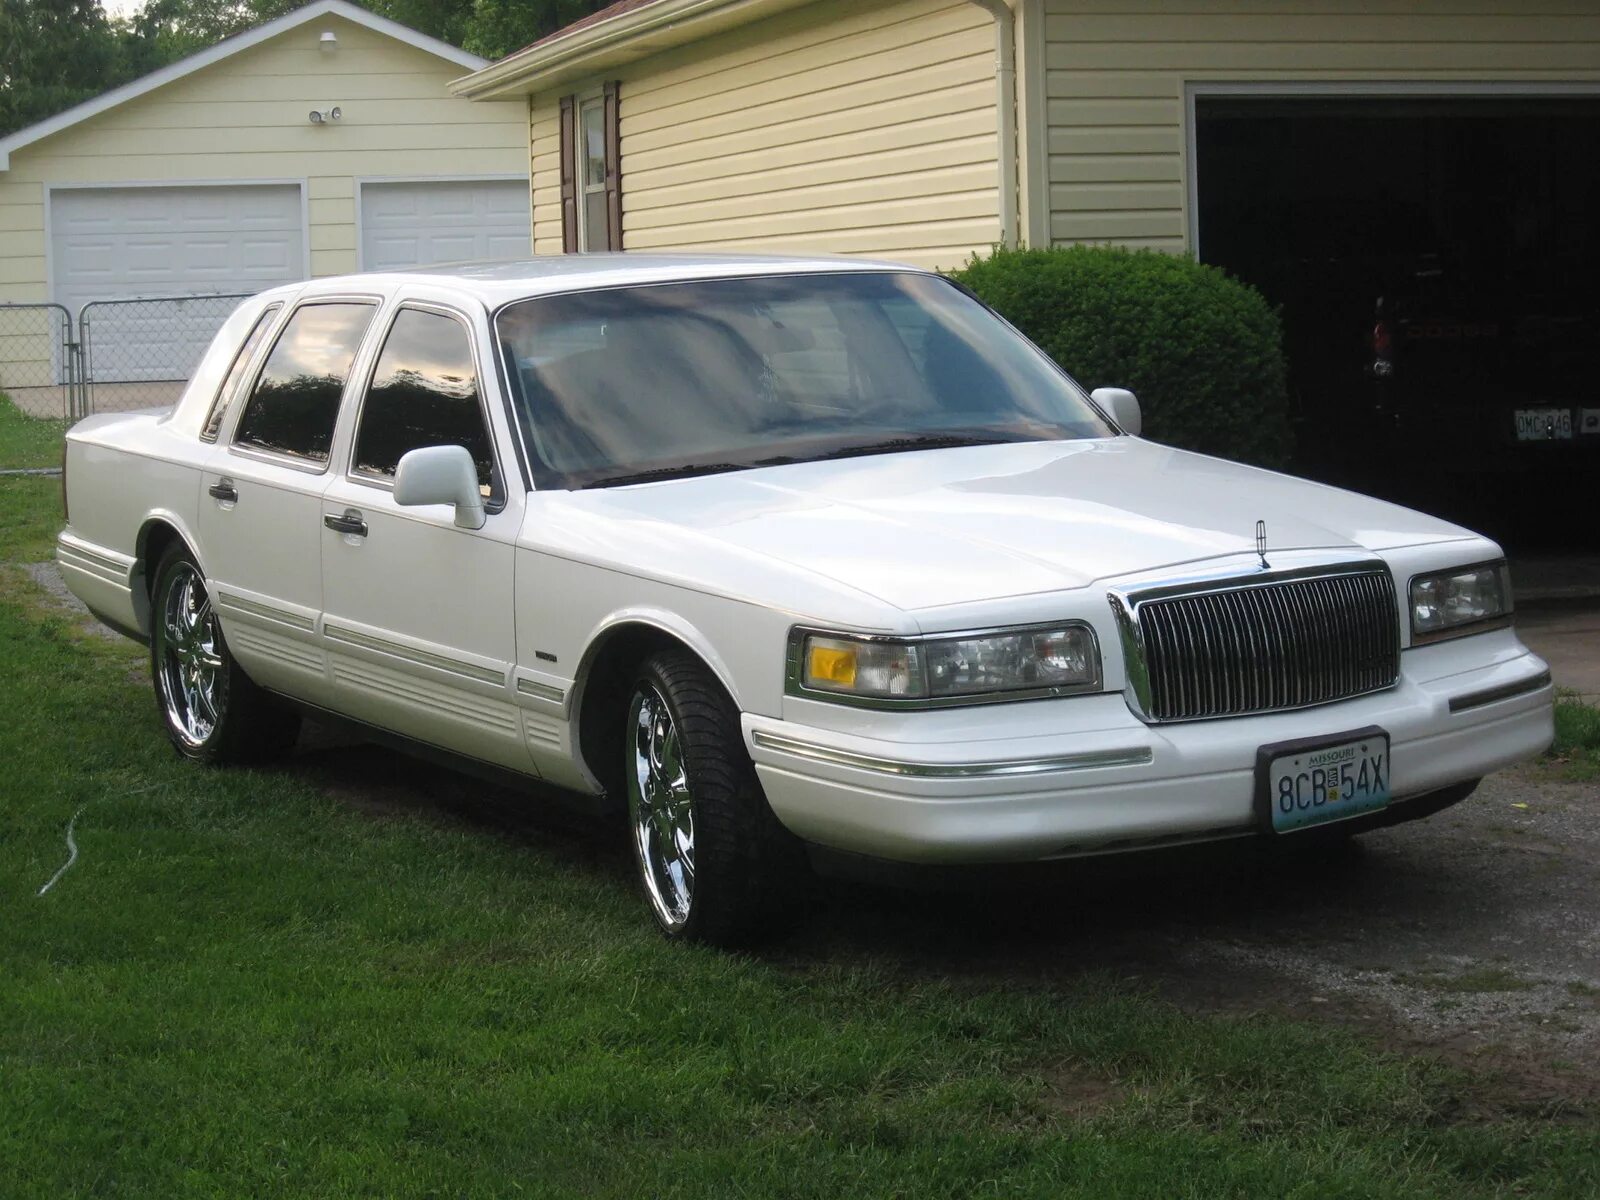 Таун кар 2. Lincoln Town car. Lincoln Town car 1996. Lincoln Town car 2004. Lincoln Town car 90 х.